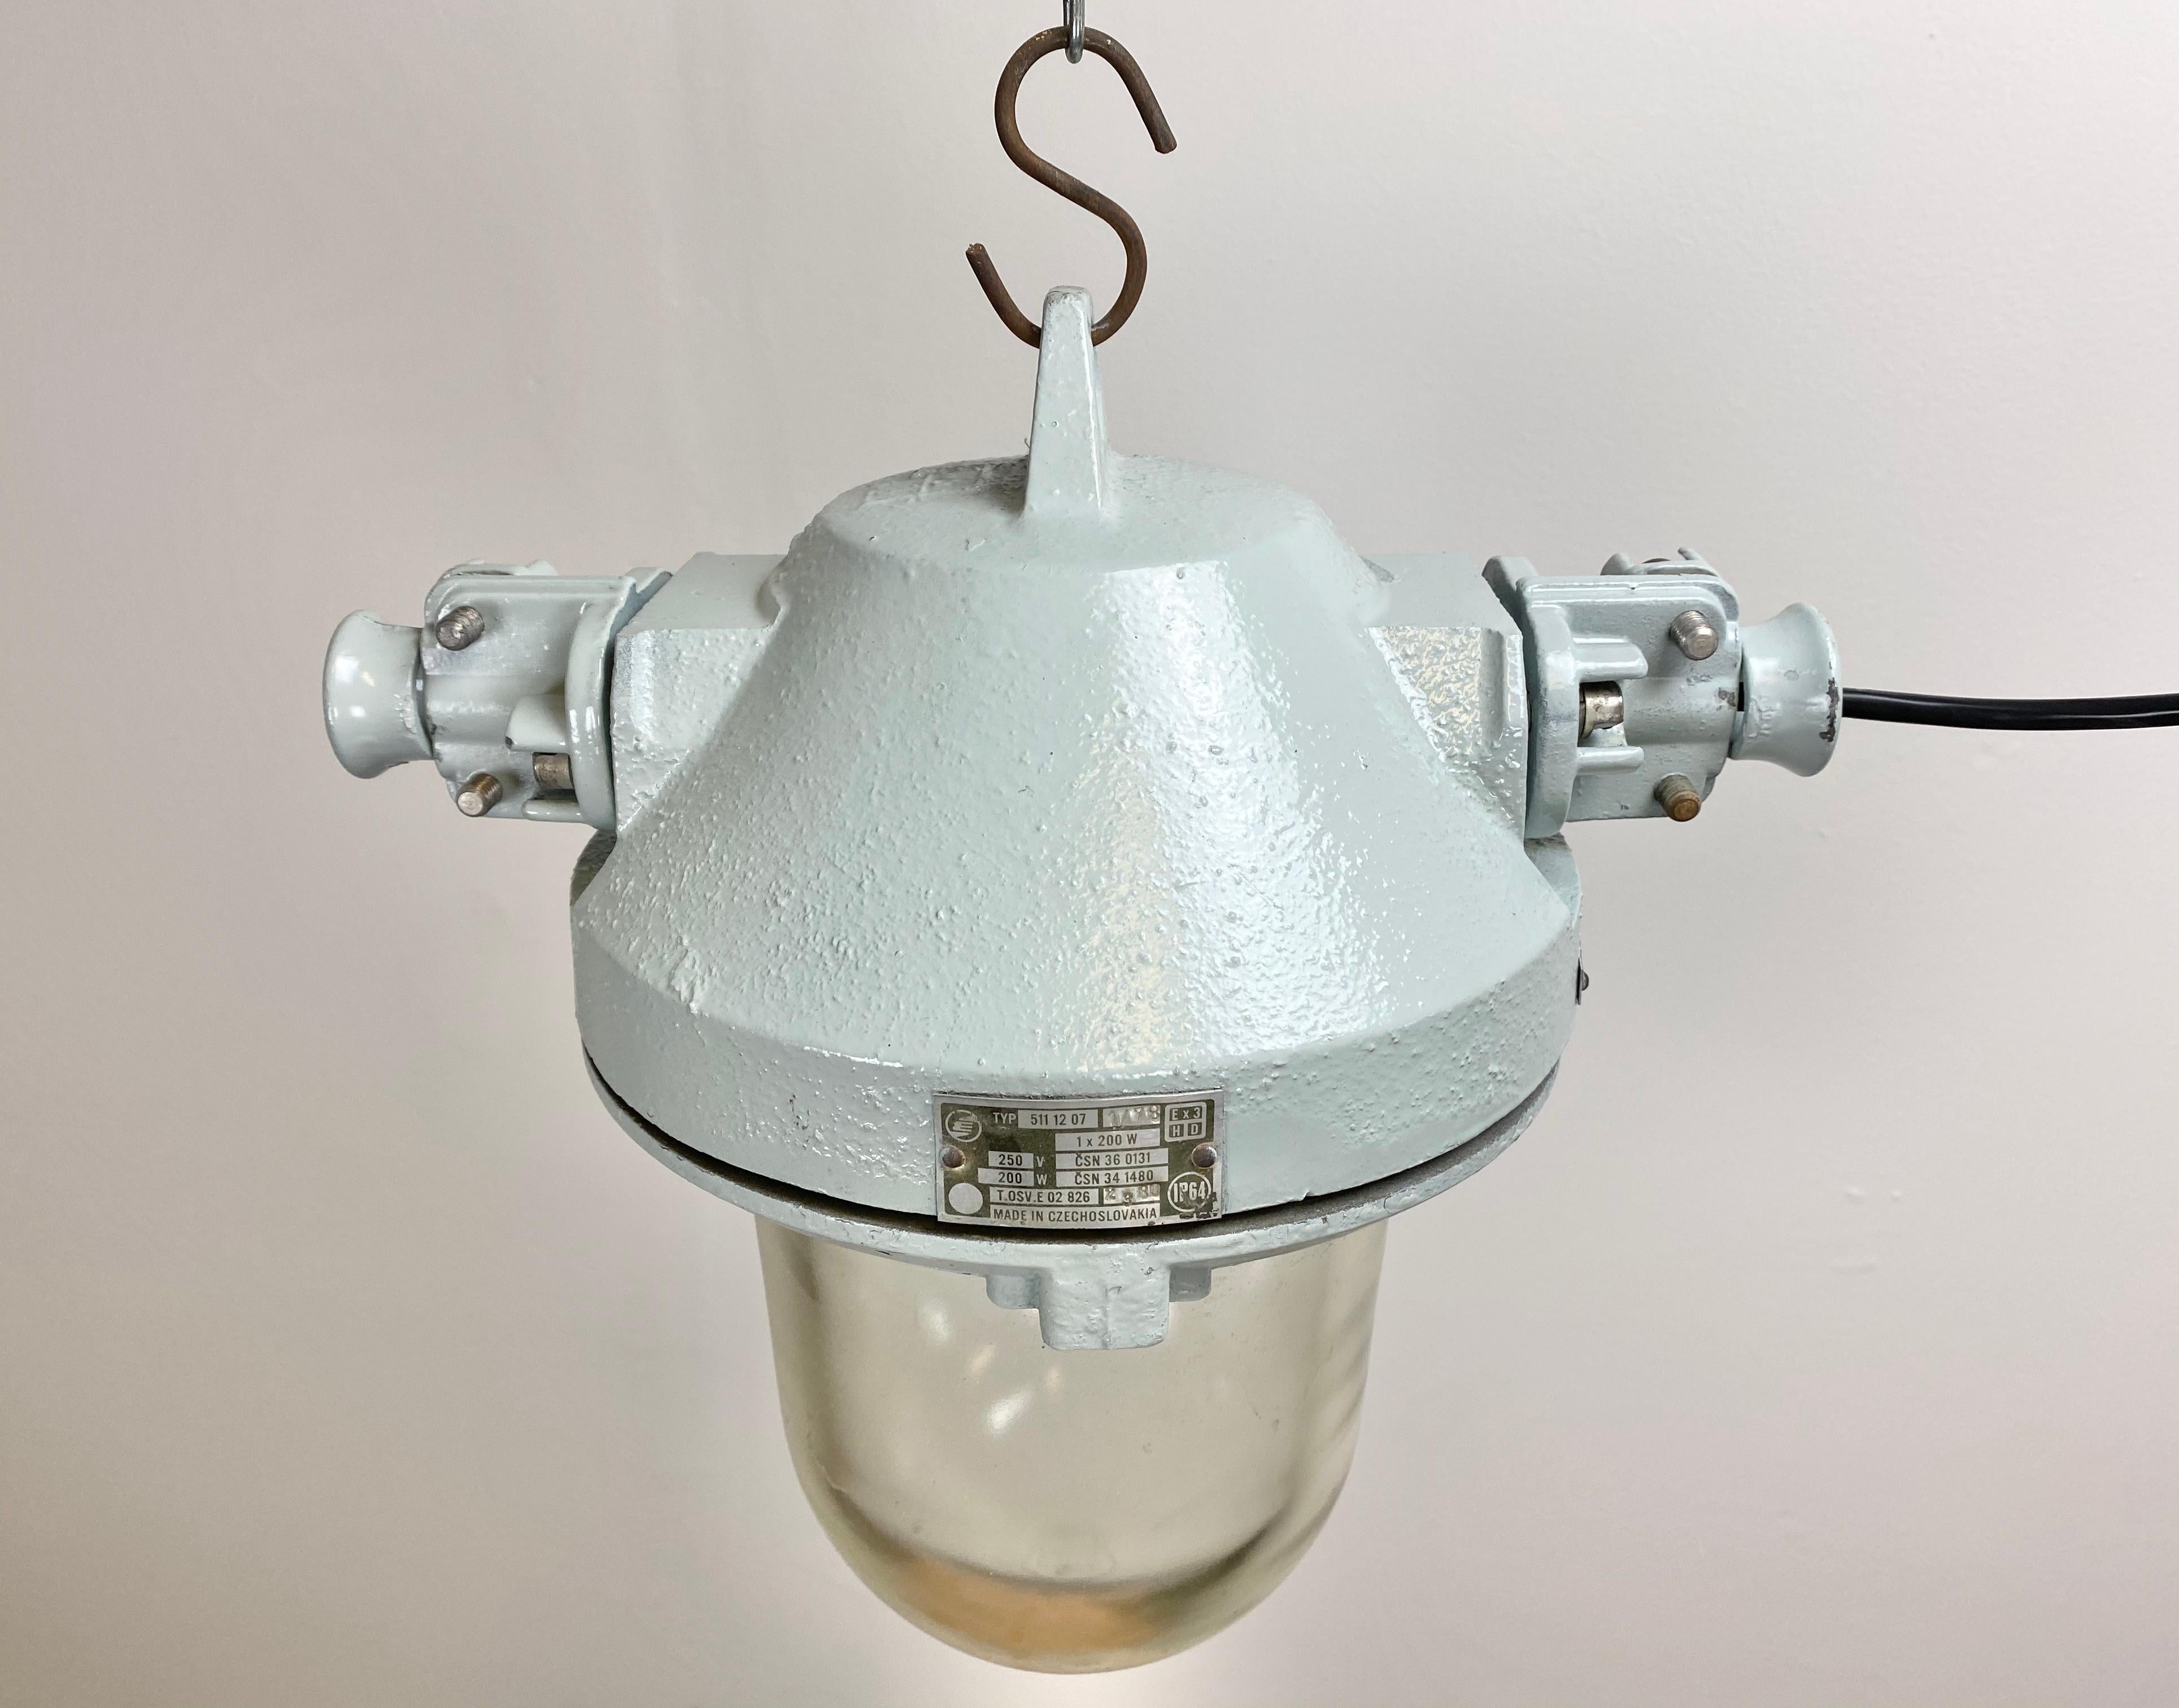 This industrial lamp was made by Elektrosvit in former Czechoslovakia during the 1970s. The lamp has a grey cast aluminium body and massive protective clear glass bulb. It features a porcelain socket for E27 lightbulbs and new wire. The weight of